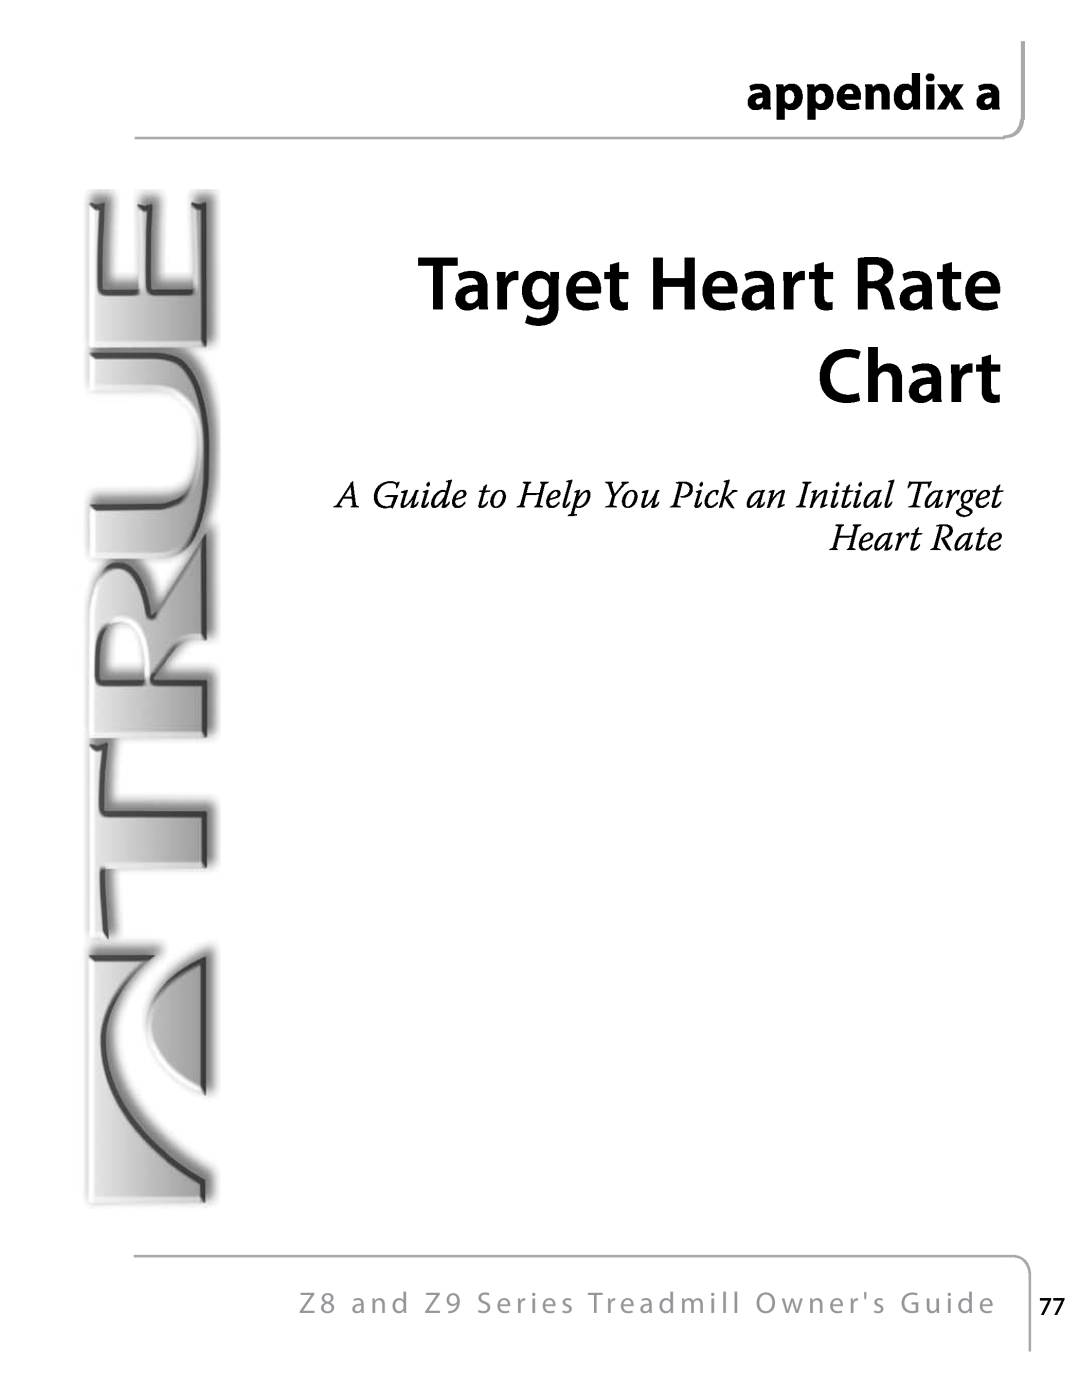 True Fitness Z9, Z8 manual appendix a, A Guide to Help You Pick an Initial Target Heart Rate, Target Heart Rate Chart 